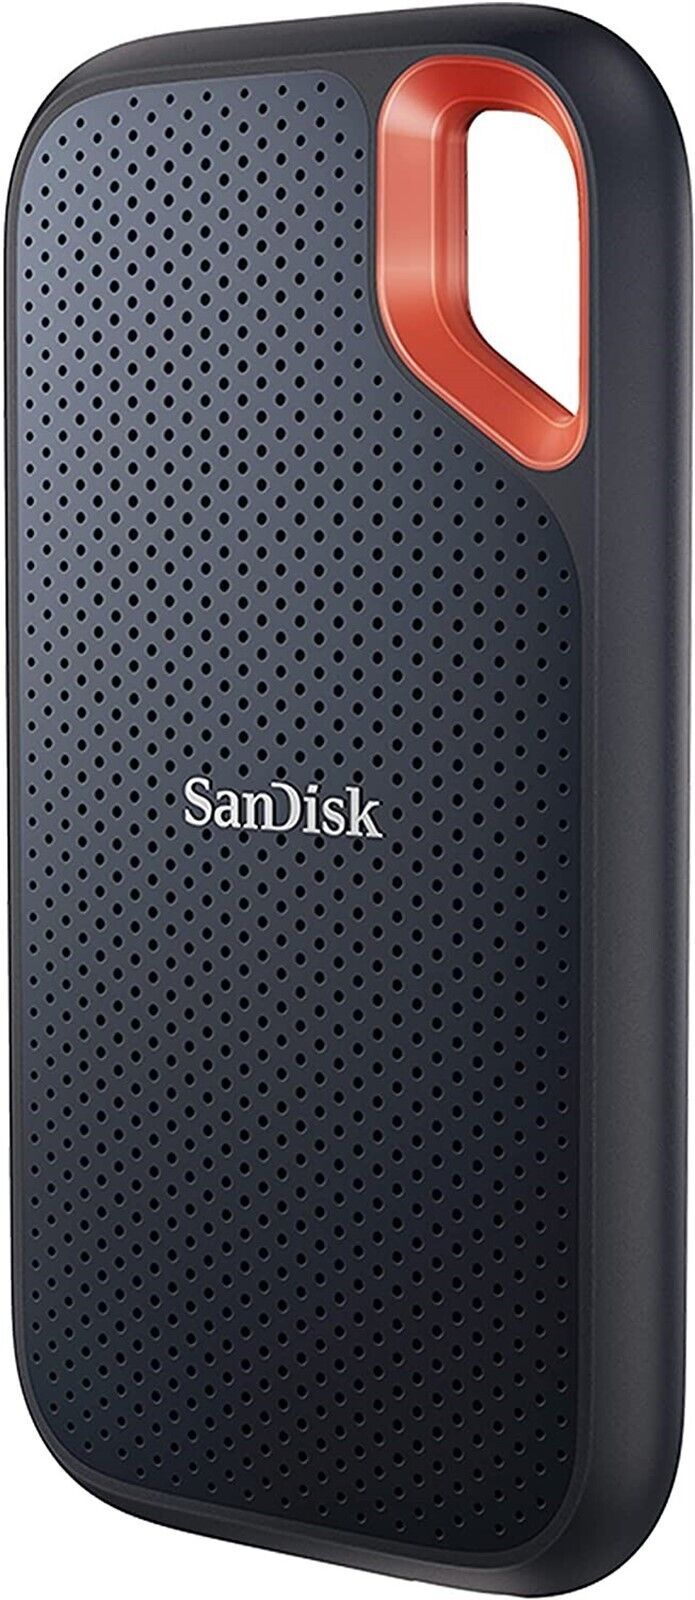 SanDisk 1TB Extreme Portable SSD - External - Up to 1050MB/s - SDSSDE61-1T00-G25